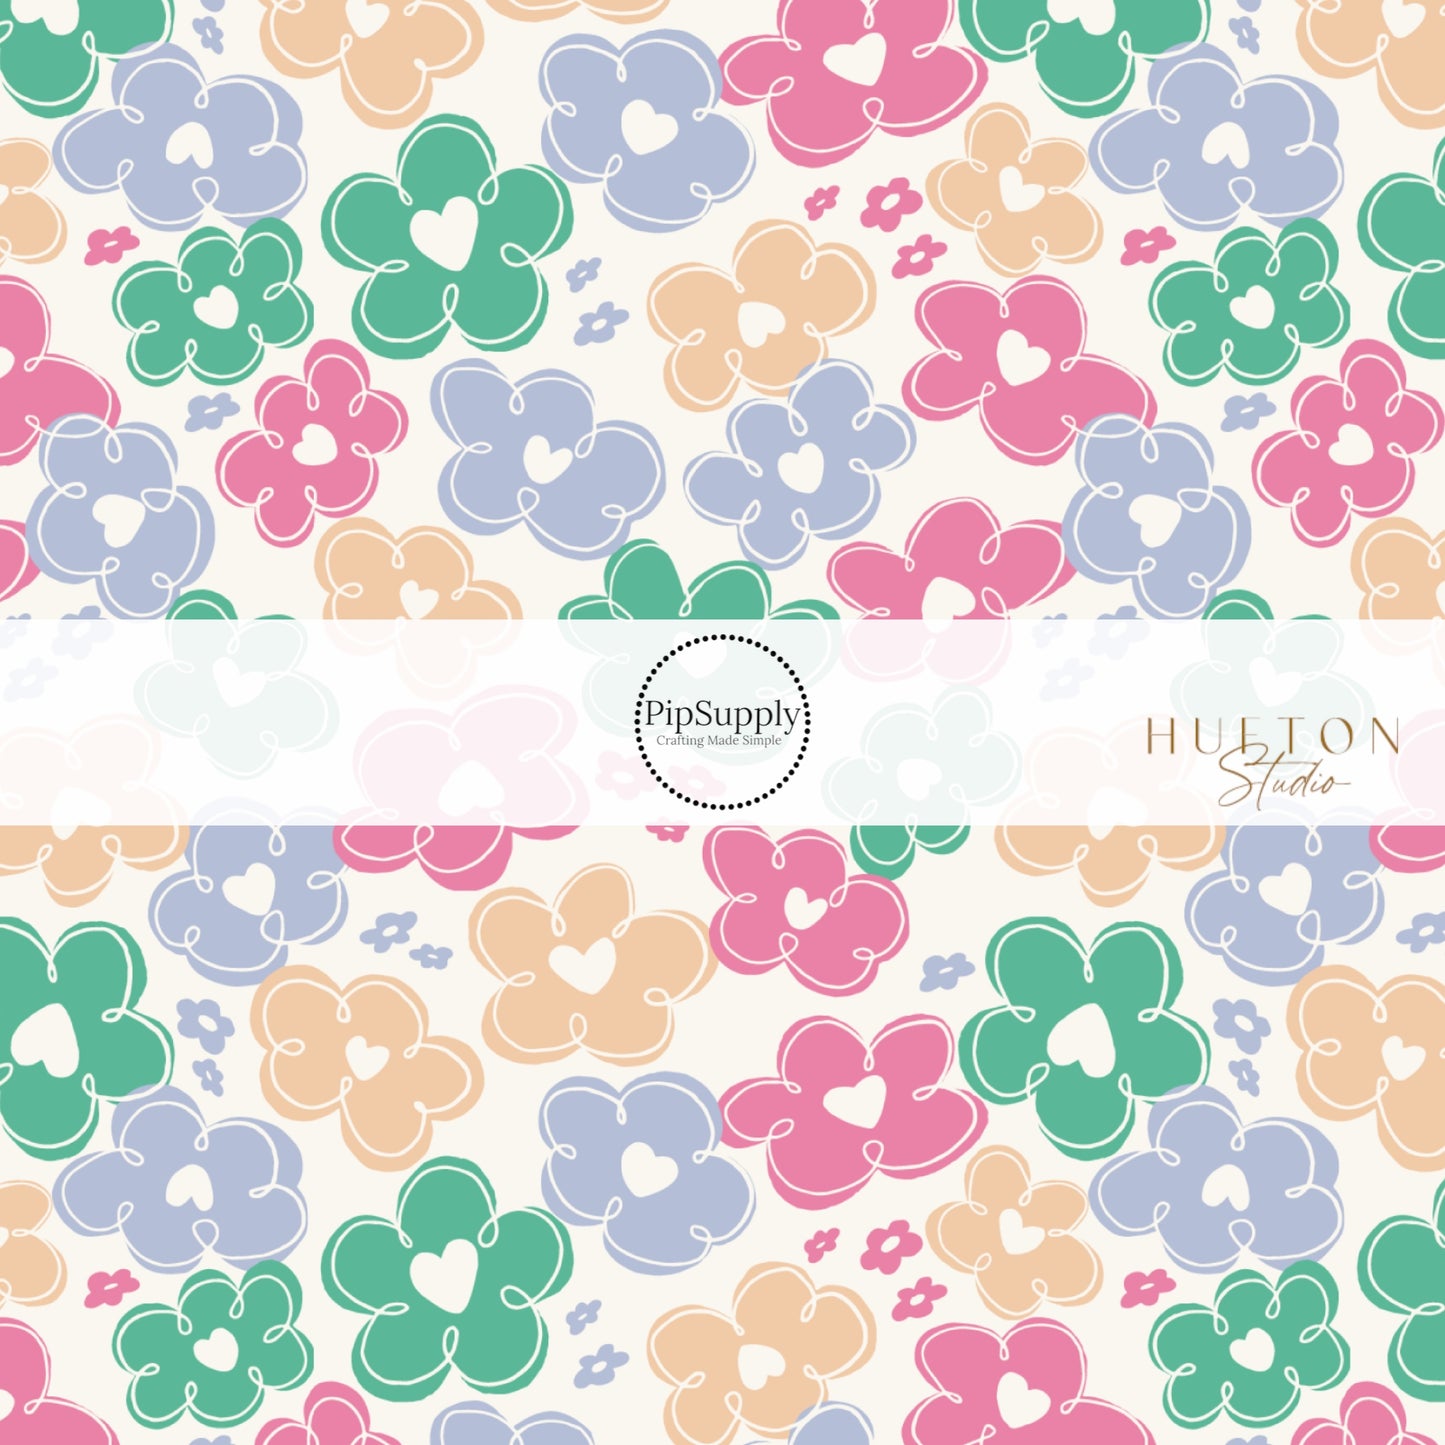 Animated floral designs with blue, beige, pink, and green flowers fabric by the yard